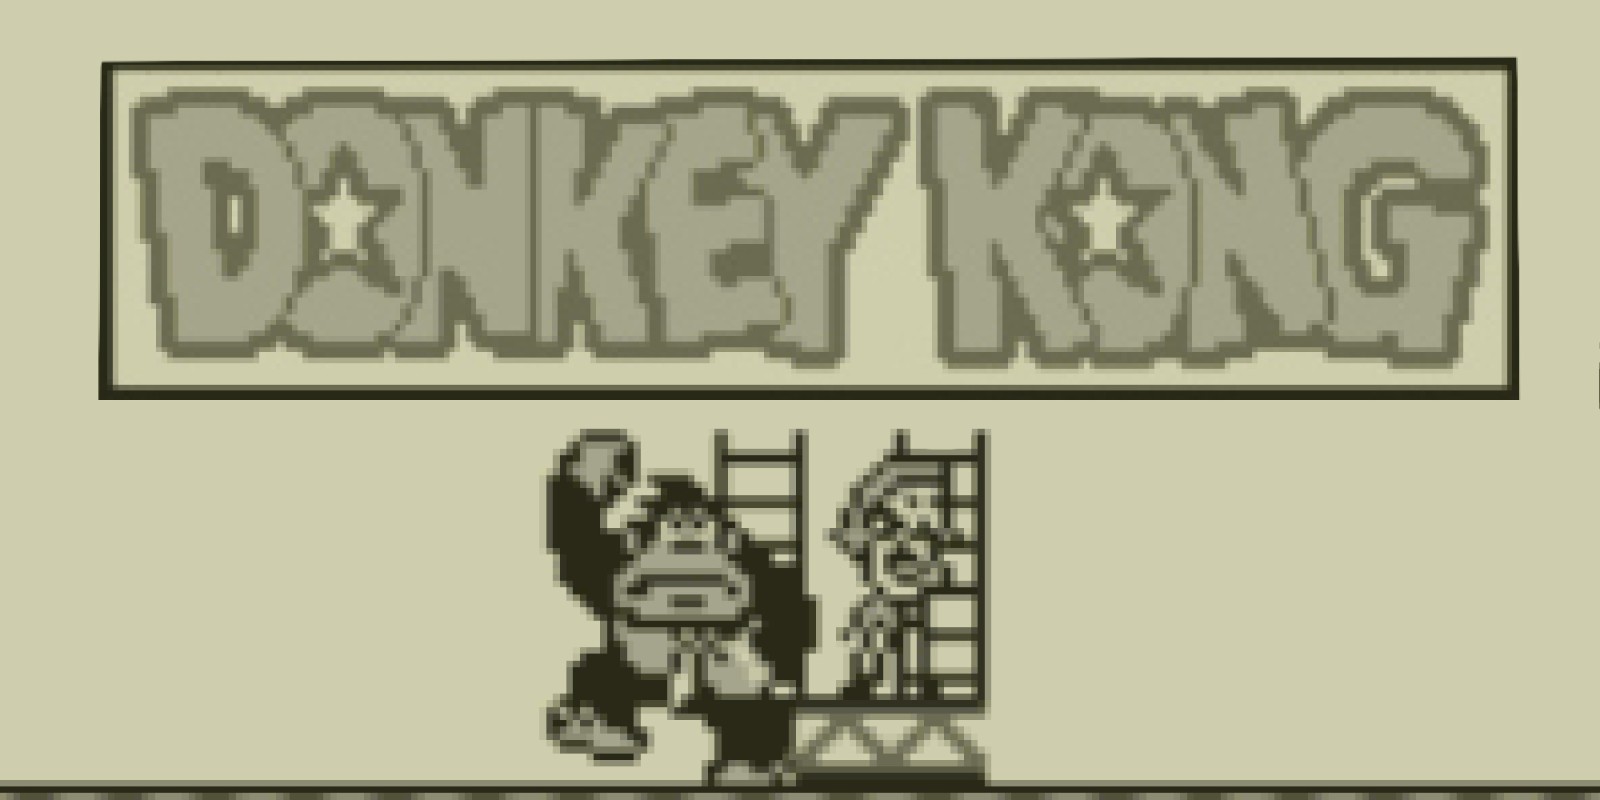 donkey kong 3 initial release date